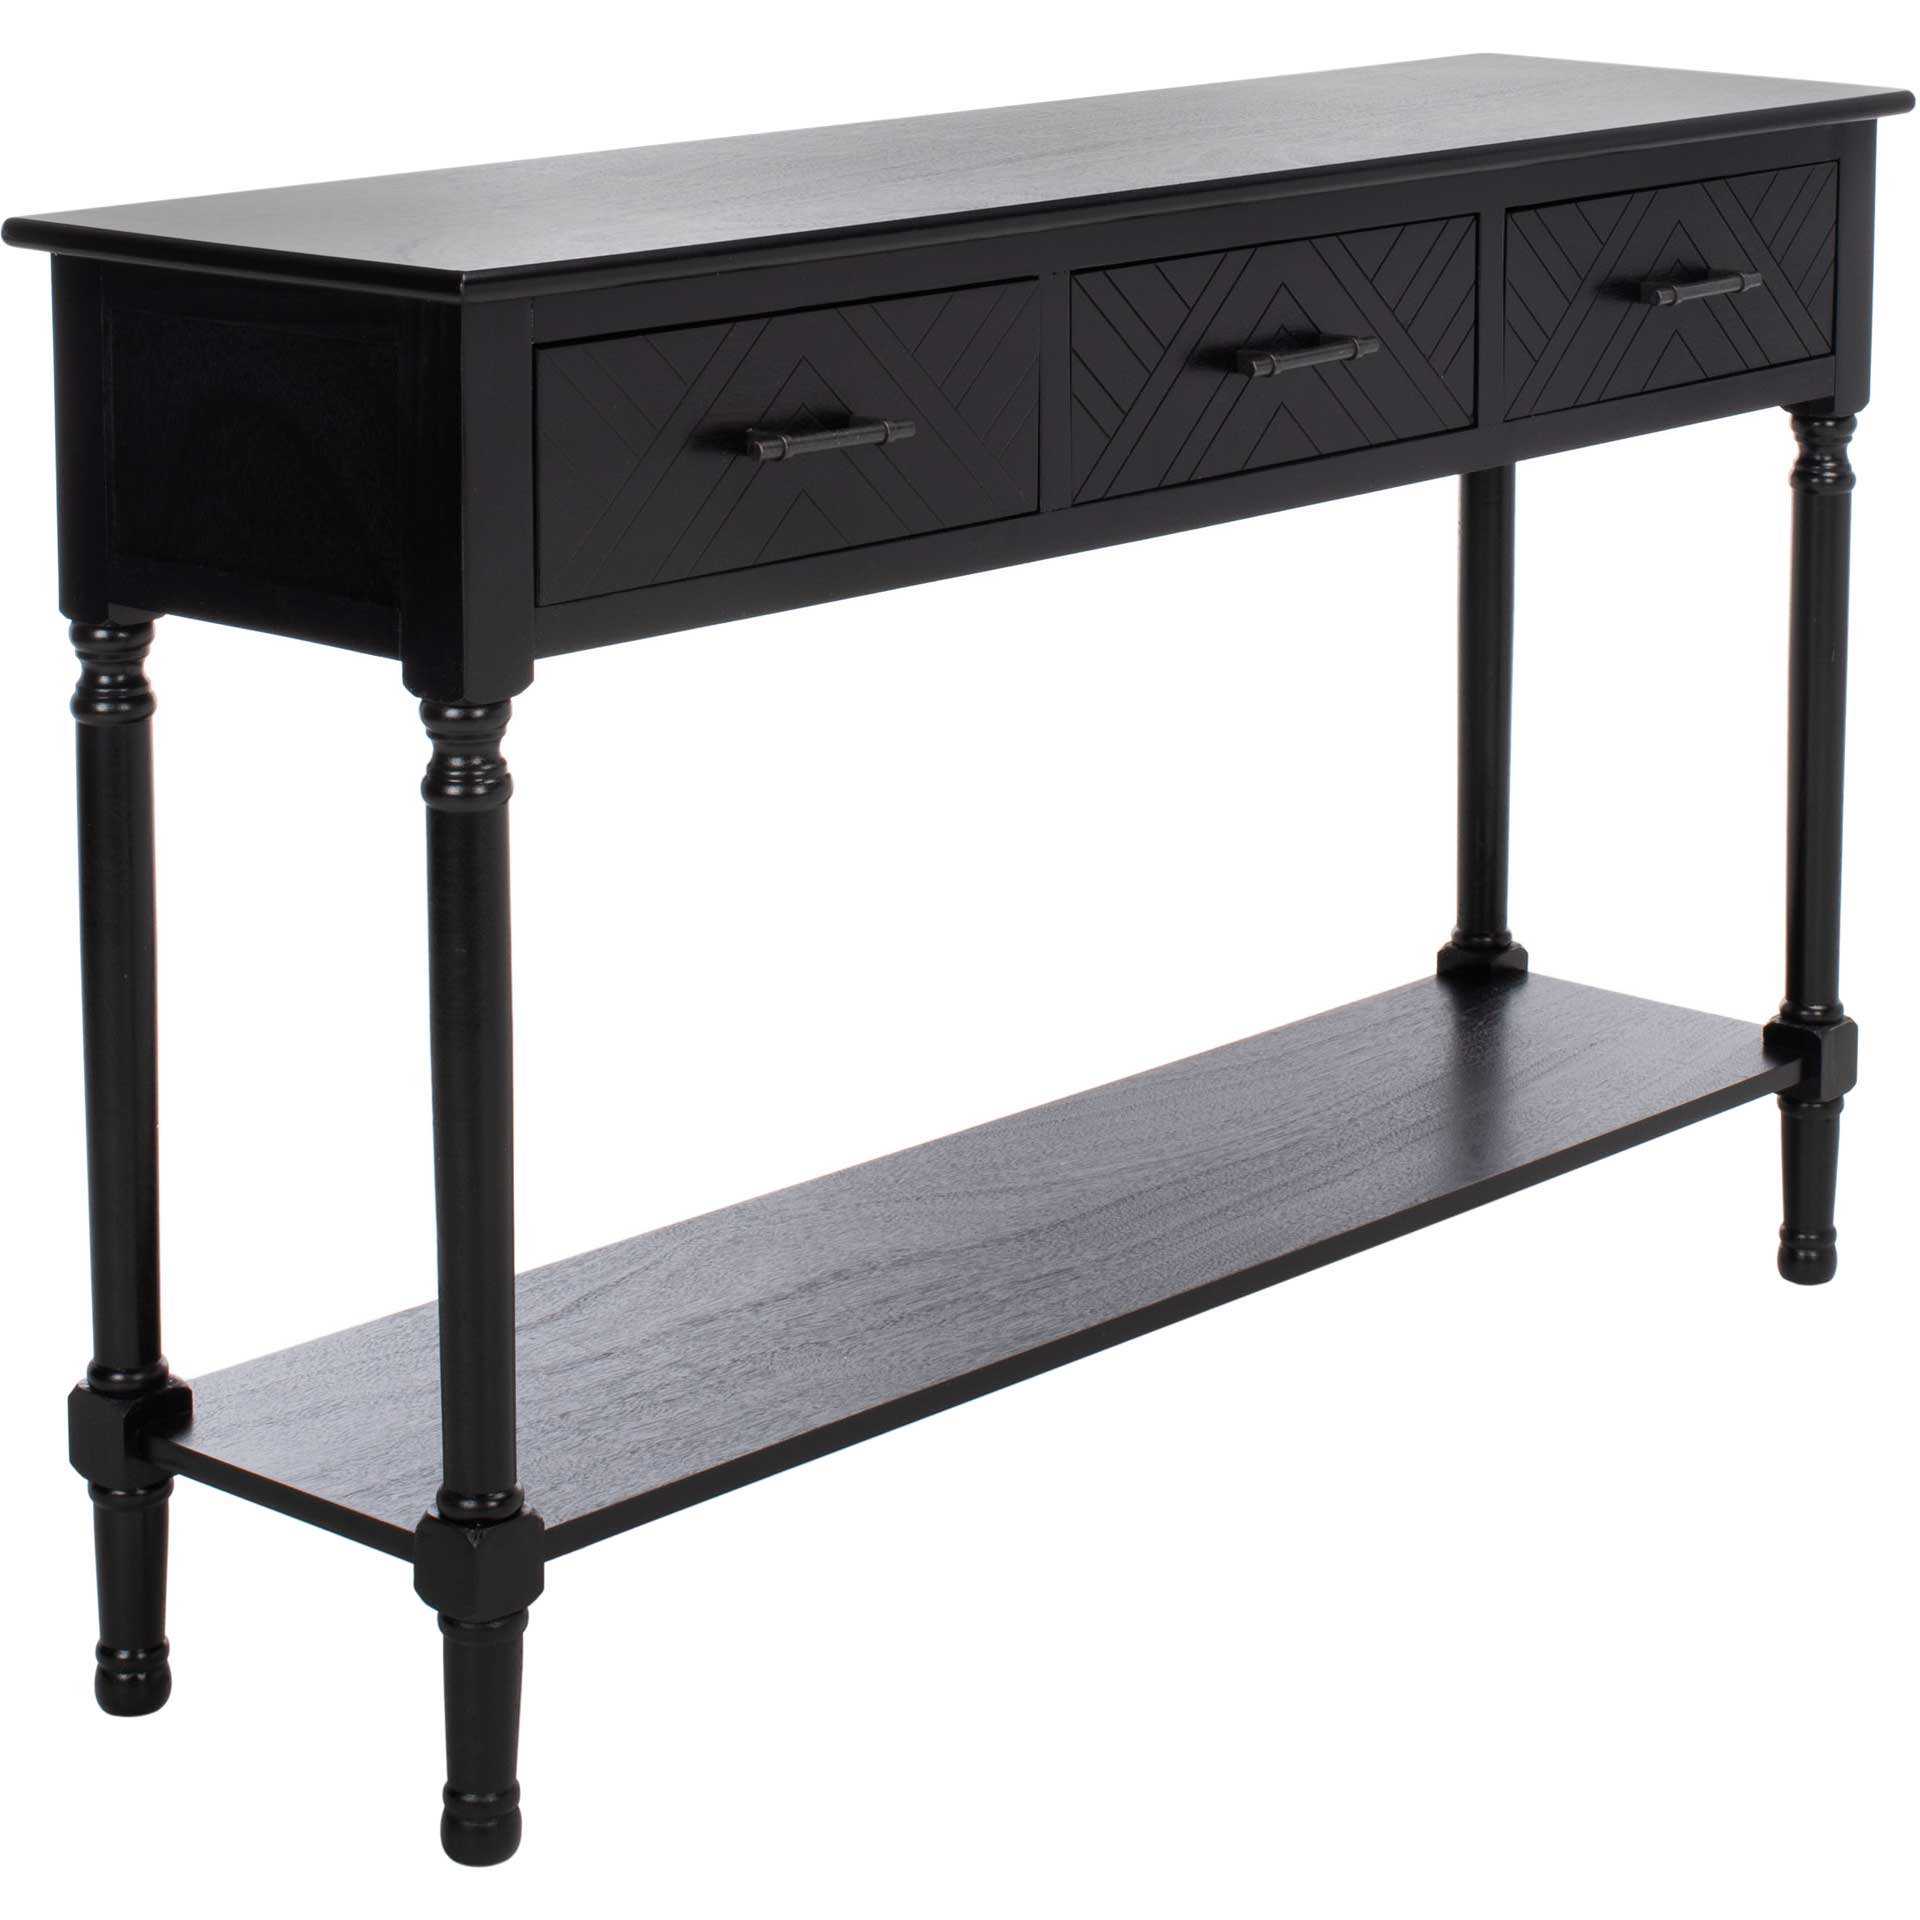 Pebbles 3 Drawer Console Table Black